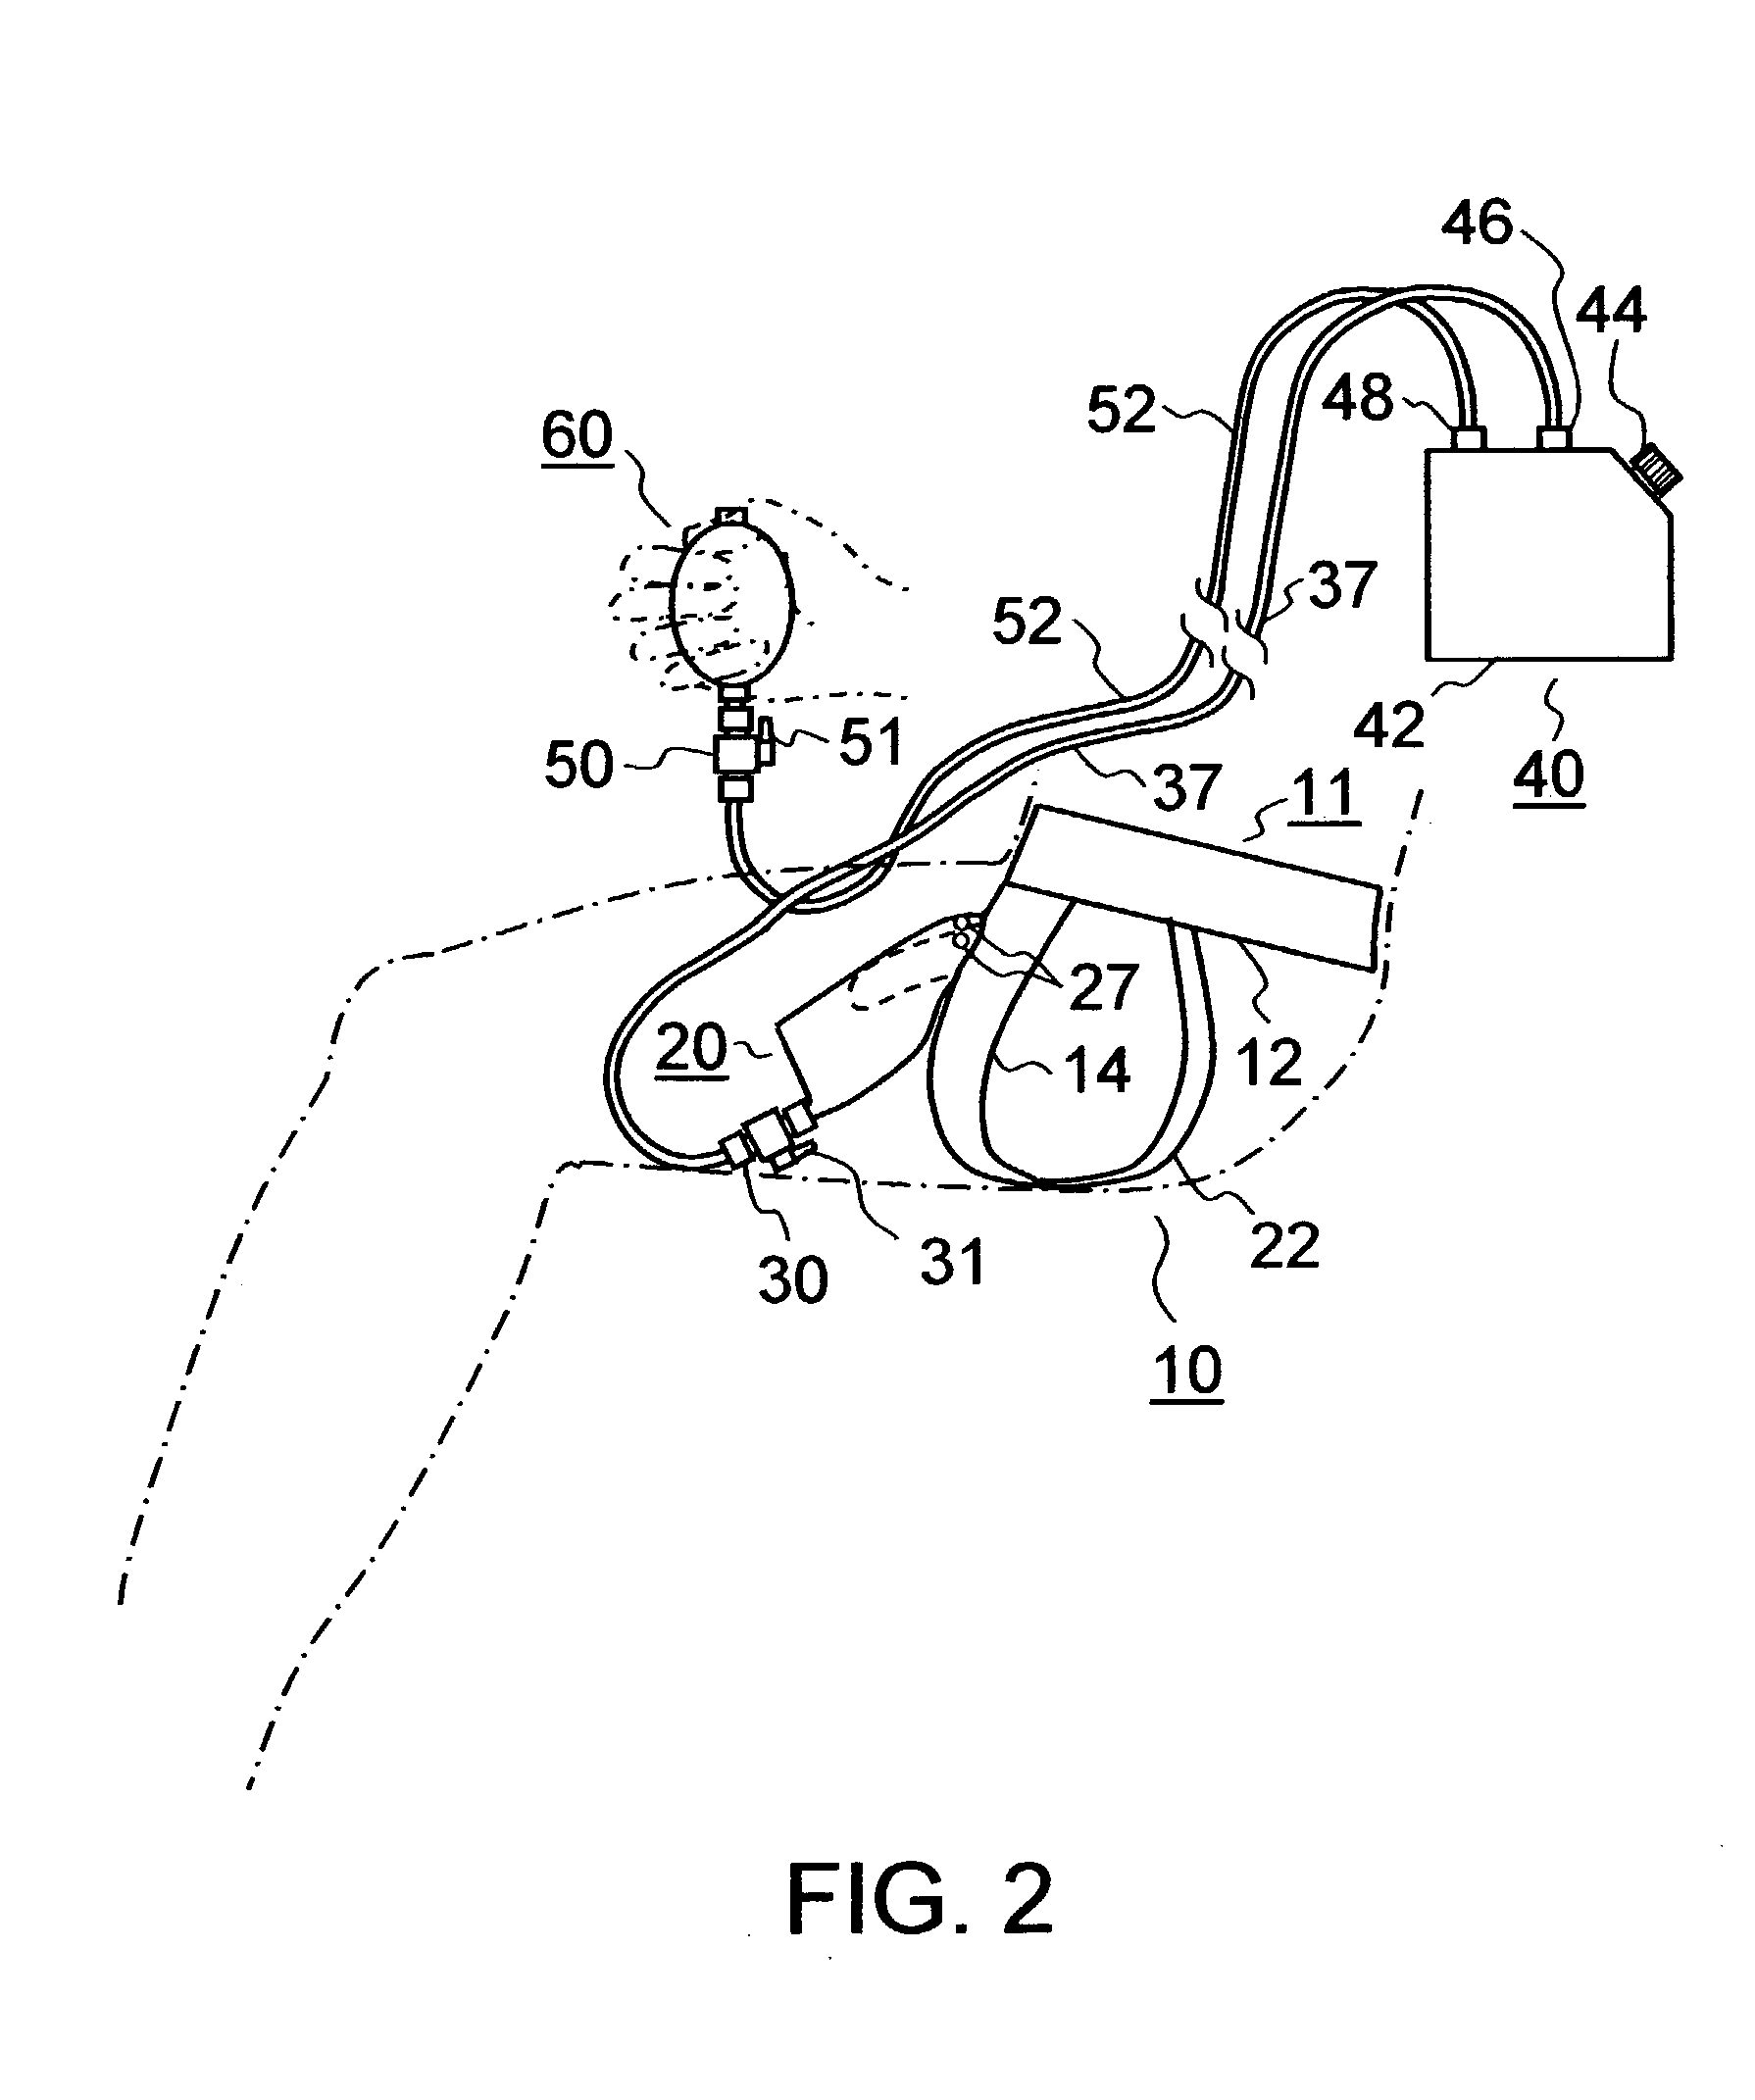 Urine collection system for males utilizing a flexible external catheter and vacuum assistance